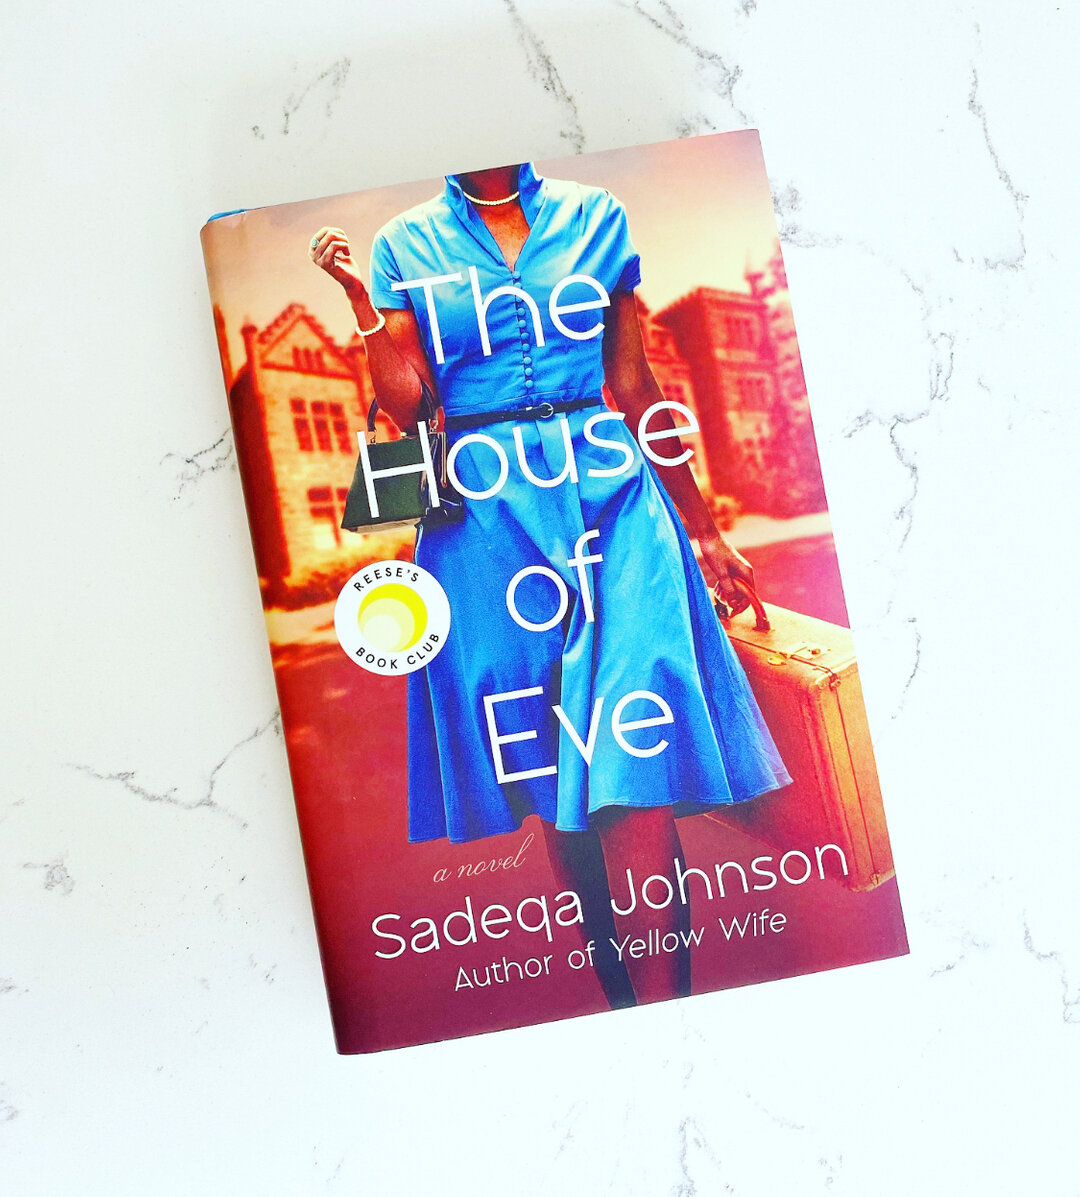 The House of Eve| by Sadeqa Johnson⠀⠀⠀⠀⠀⠀⠀⠀⠀
⠀⠀⠀⠀⠀⠀⠀⠀⠀
REVIEW: Great storytelling⠀⠀⠀⠀⠀⠀⠀⠀⠀
#ITSLITBOOKSREVIEW⠀⠀⠀⠀⠀⠀⠀⠀⠀
⠀⠀⠀⠀⠀⠀⠀⠀⠀
SYNOPSIS: Set in the 1950s, fifteen-year-old Ruby is a determined and studious girl set to go to college. But a taboo lov